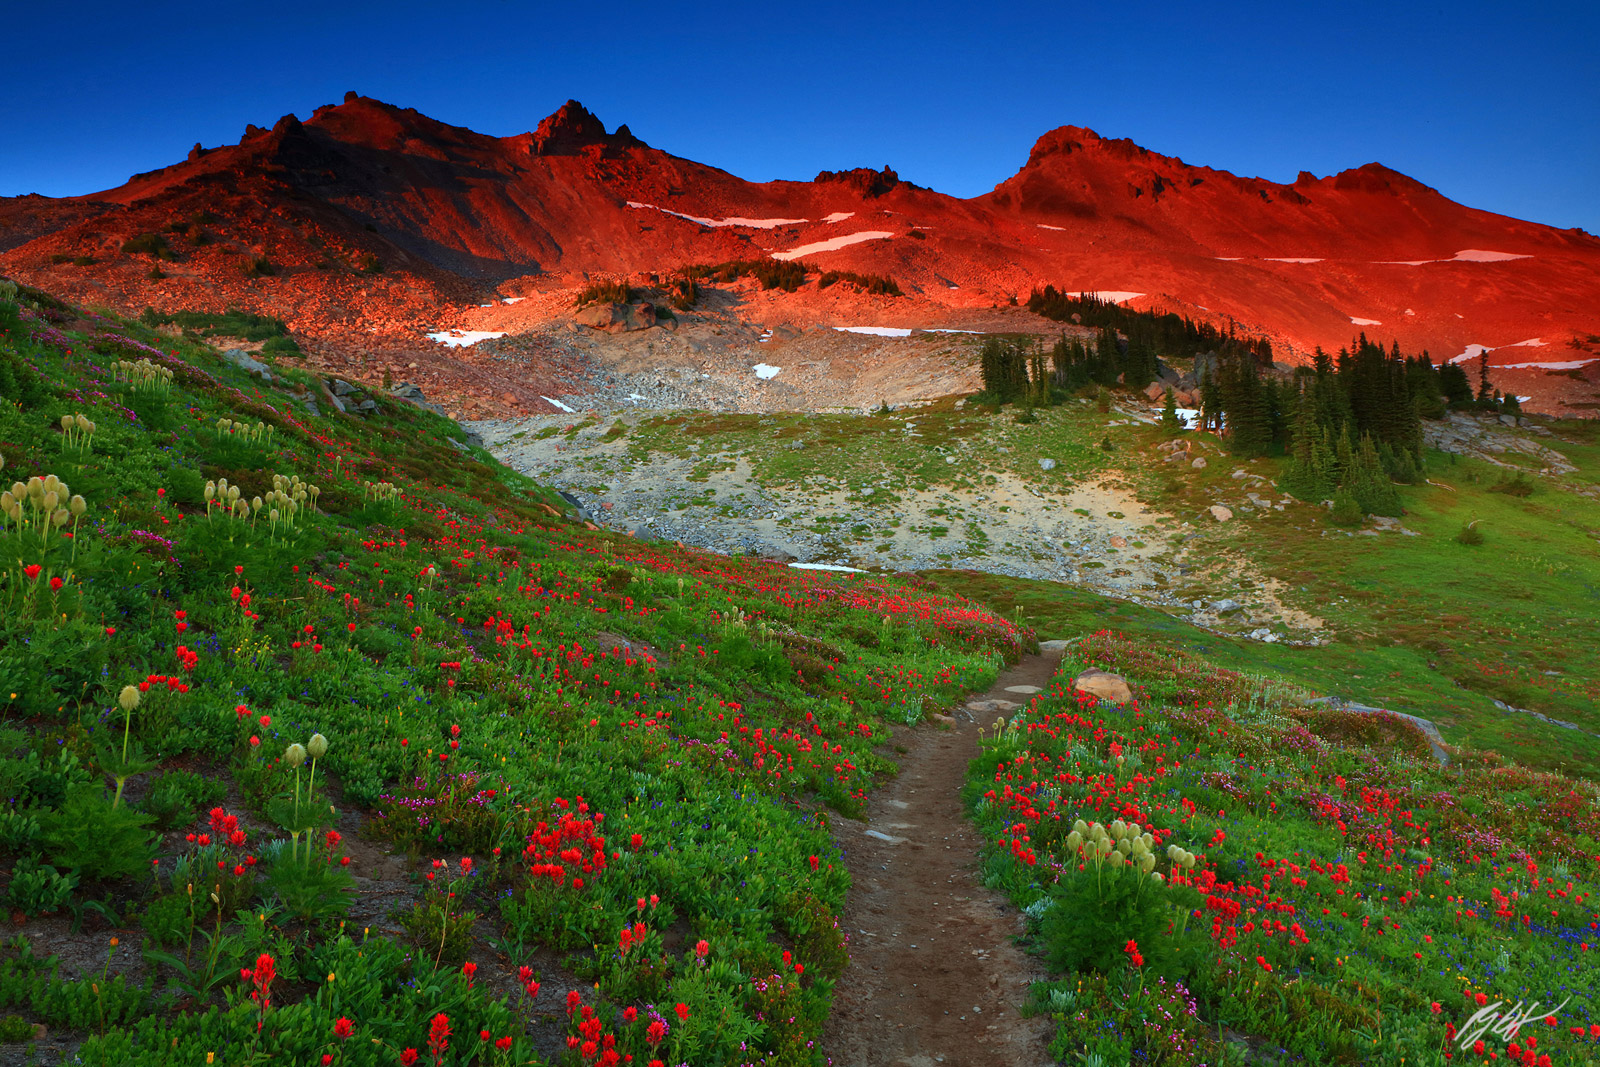 Sunset Wildflowers and the Goat Rocks from Snow Grass Flats in the Goat Rocks Wilderness in Washington